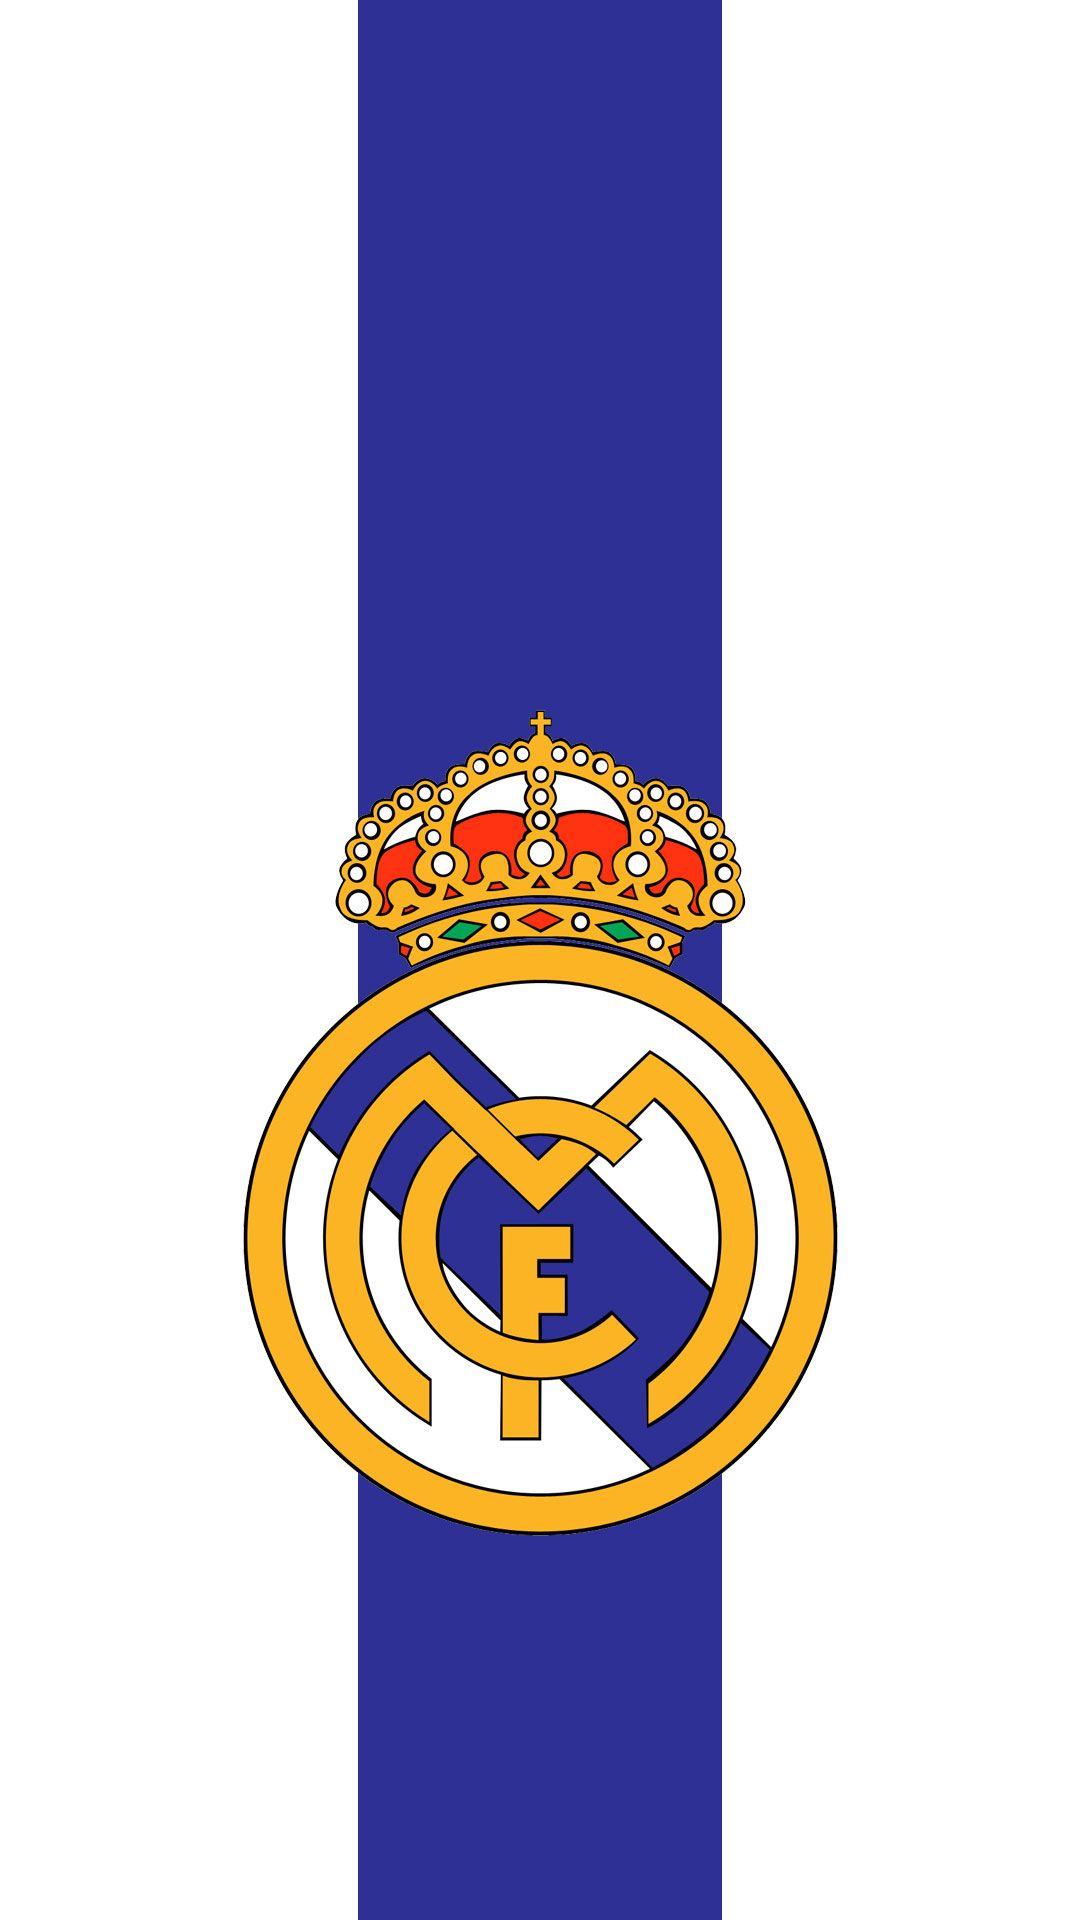 Real Madrid for Android. Wallpaper. Real madrid wallpaper